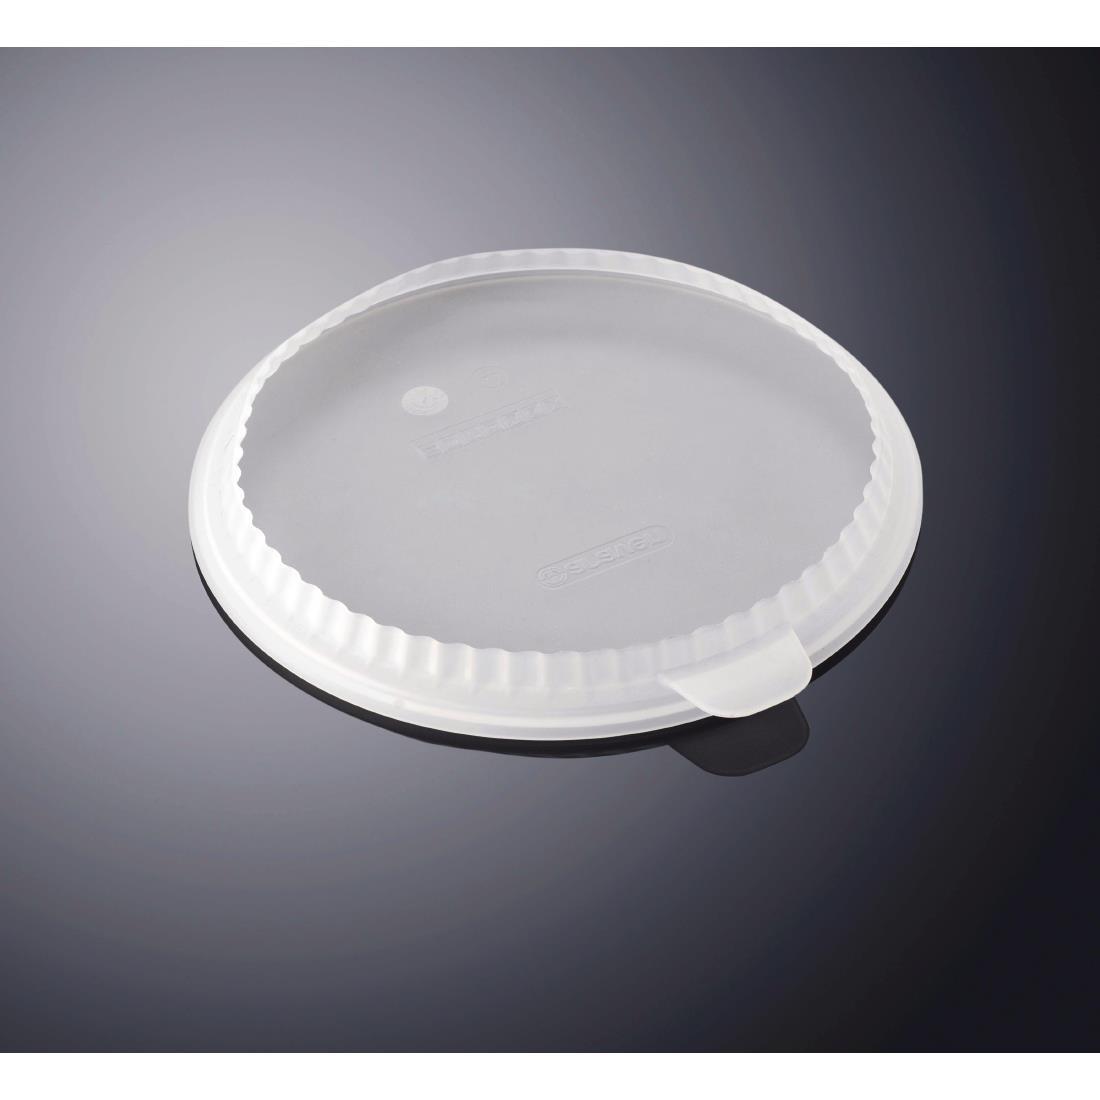 Araven Round Silicone Lid Clear 235mm - FP931  - 2